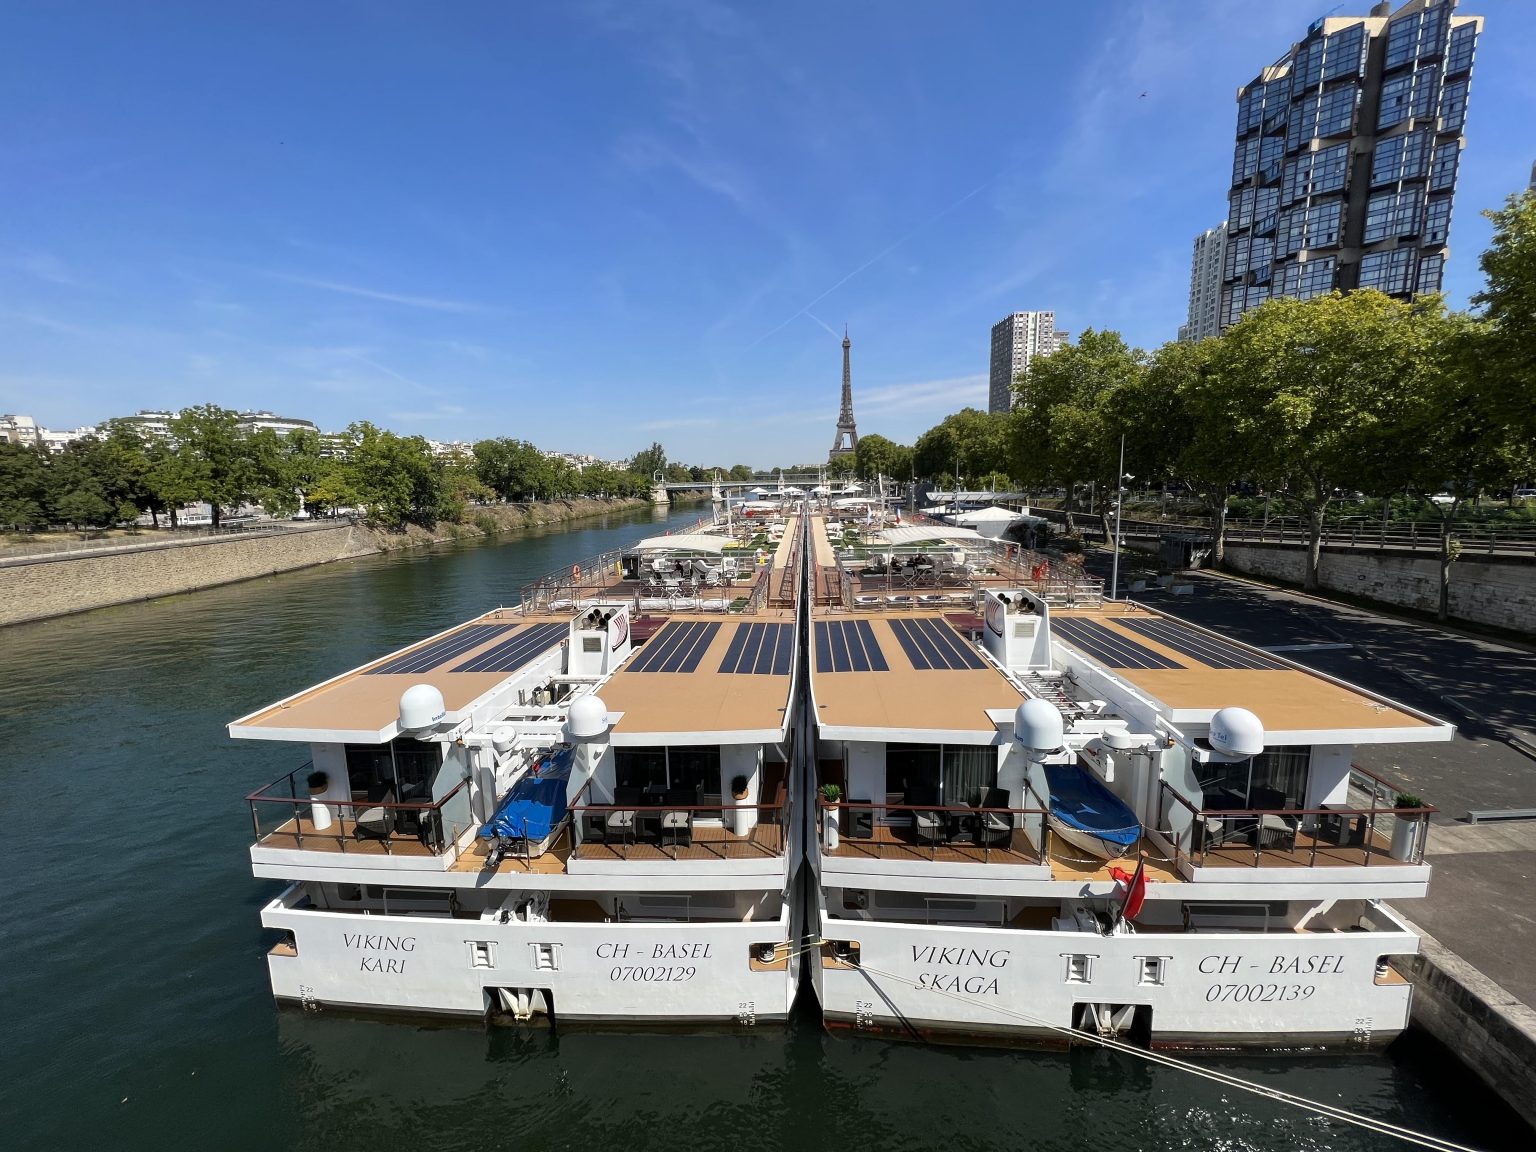 Viking's Seine River Cruise Takes Guests From Paris To The Heart Of